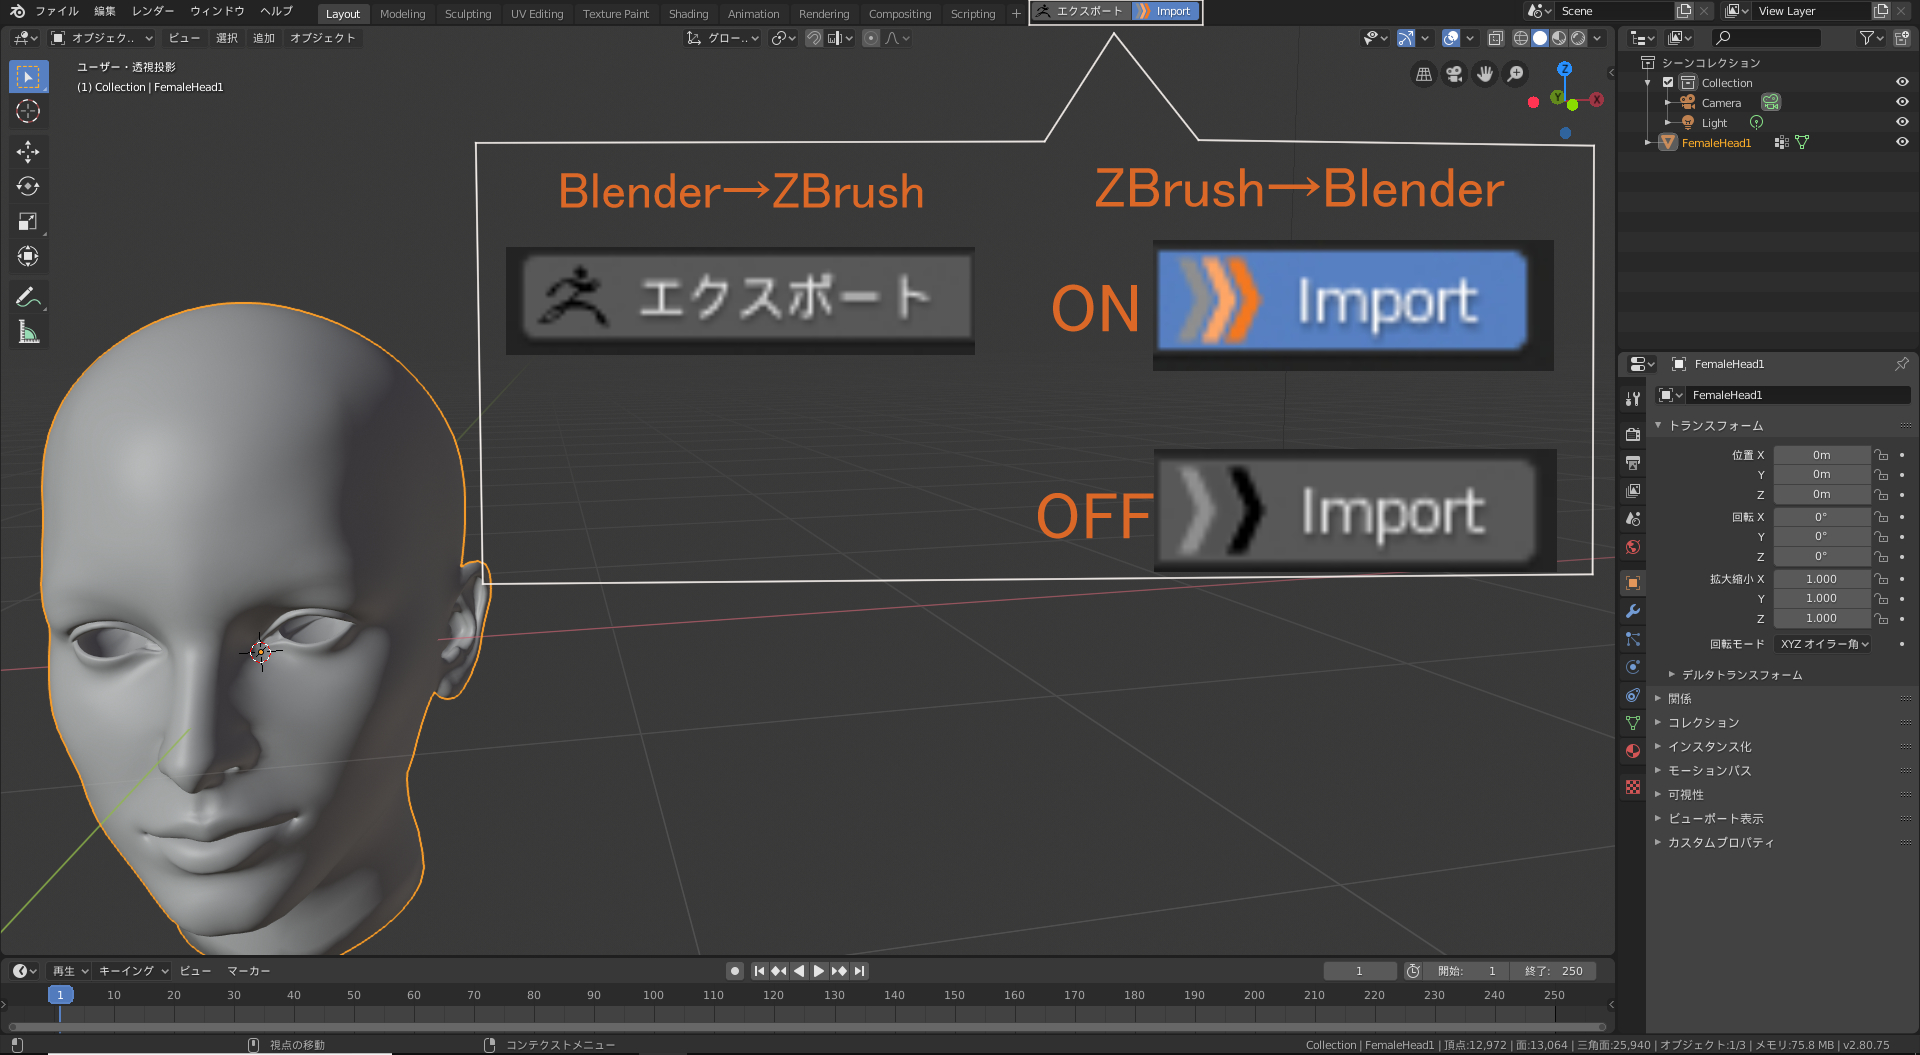 can blender be made seethrough like zbrush